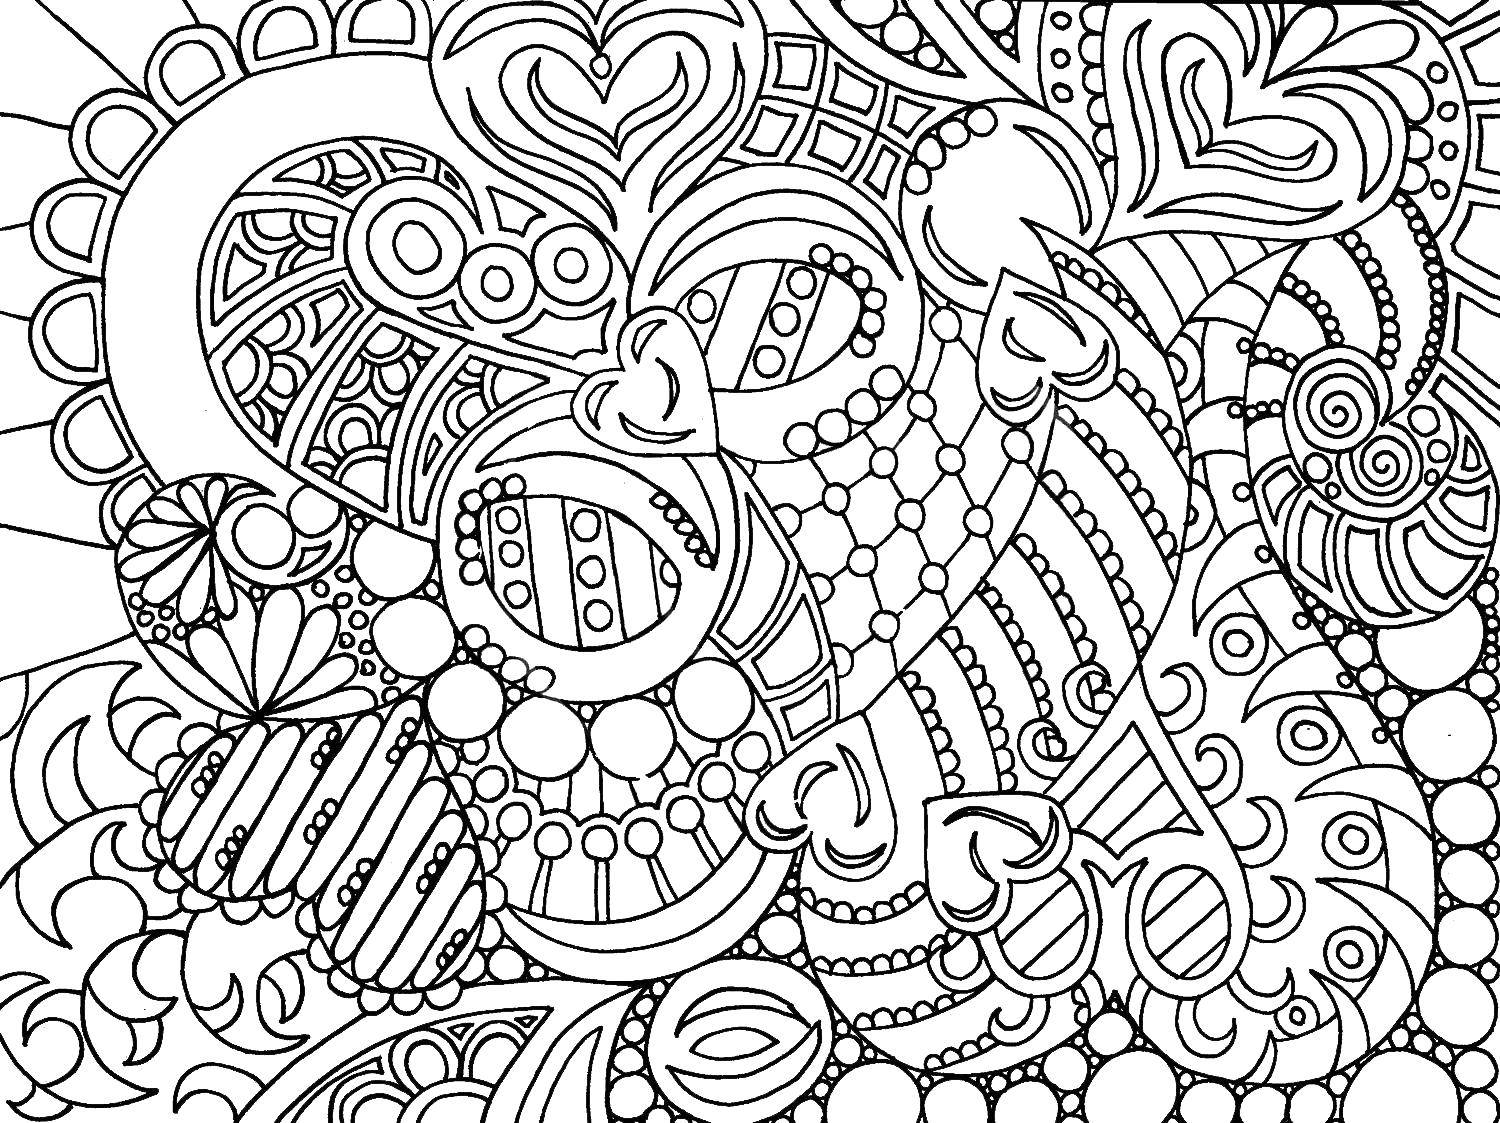 Coloring Abstract pattern. Category patterns. Tags:  Patterns, hearts.